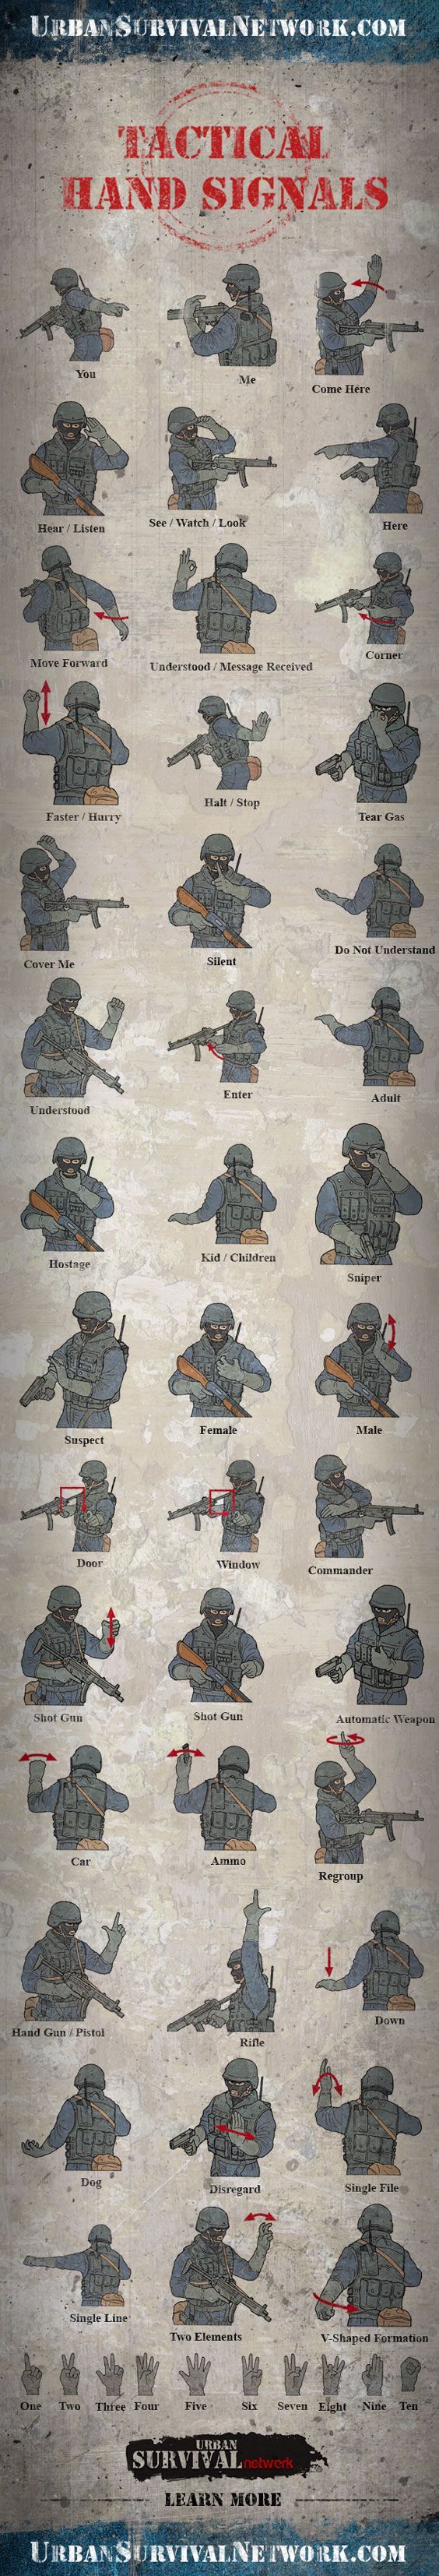 Tactical Hand Signals. Learn how to use hand signals, to avoid alert the Zombies/Raiders to your presence if in a dangerous situation with your group.